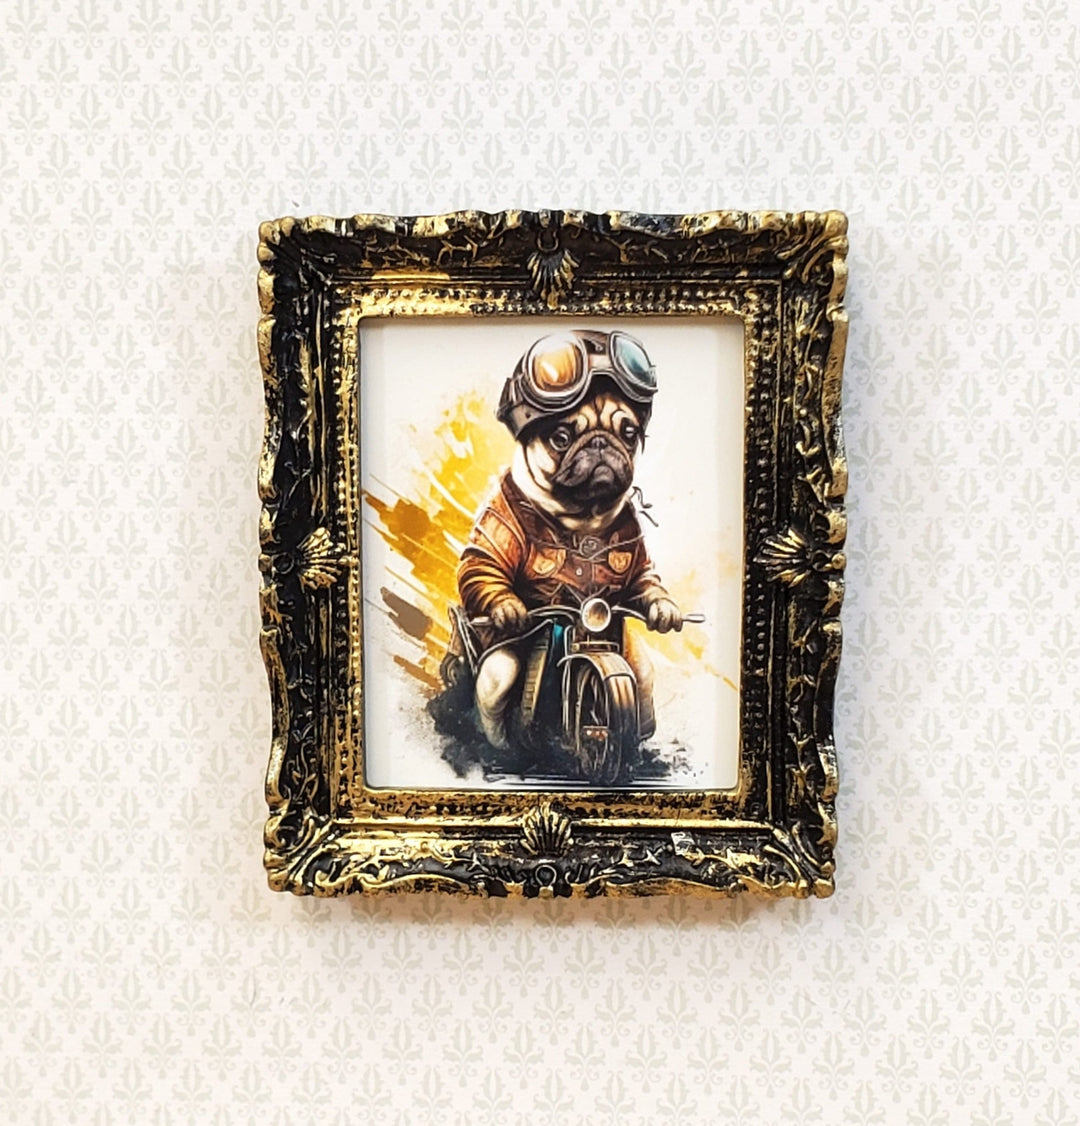 Miniature Pug on a Motorcycle with Goggles Framed Print Dog 1:12 Scale Dollhouse - Miniature Crush